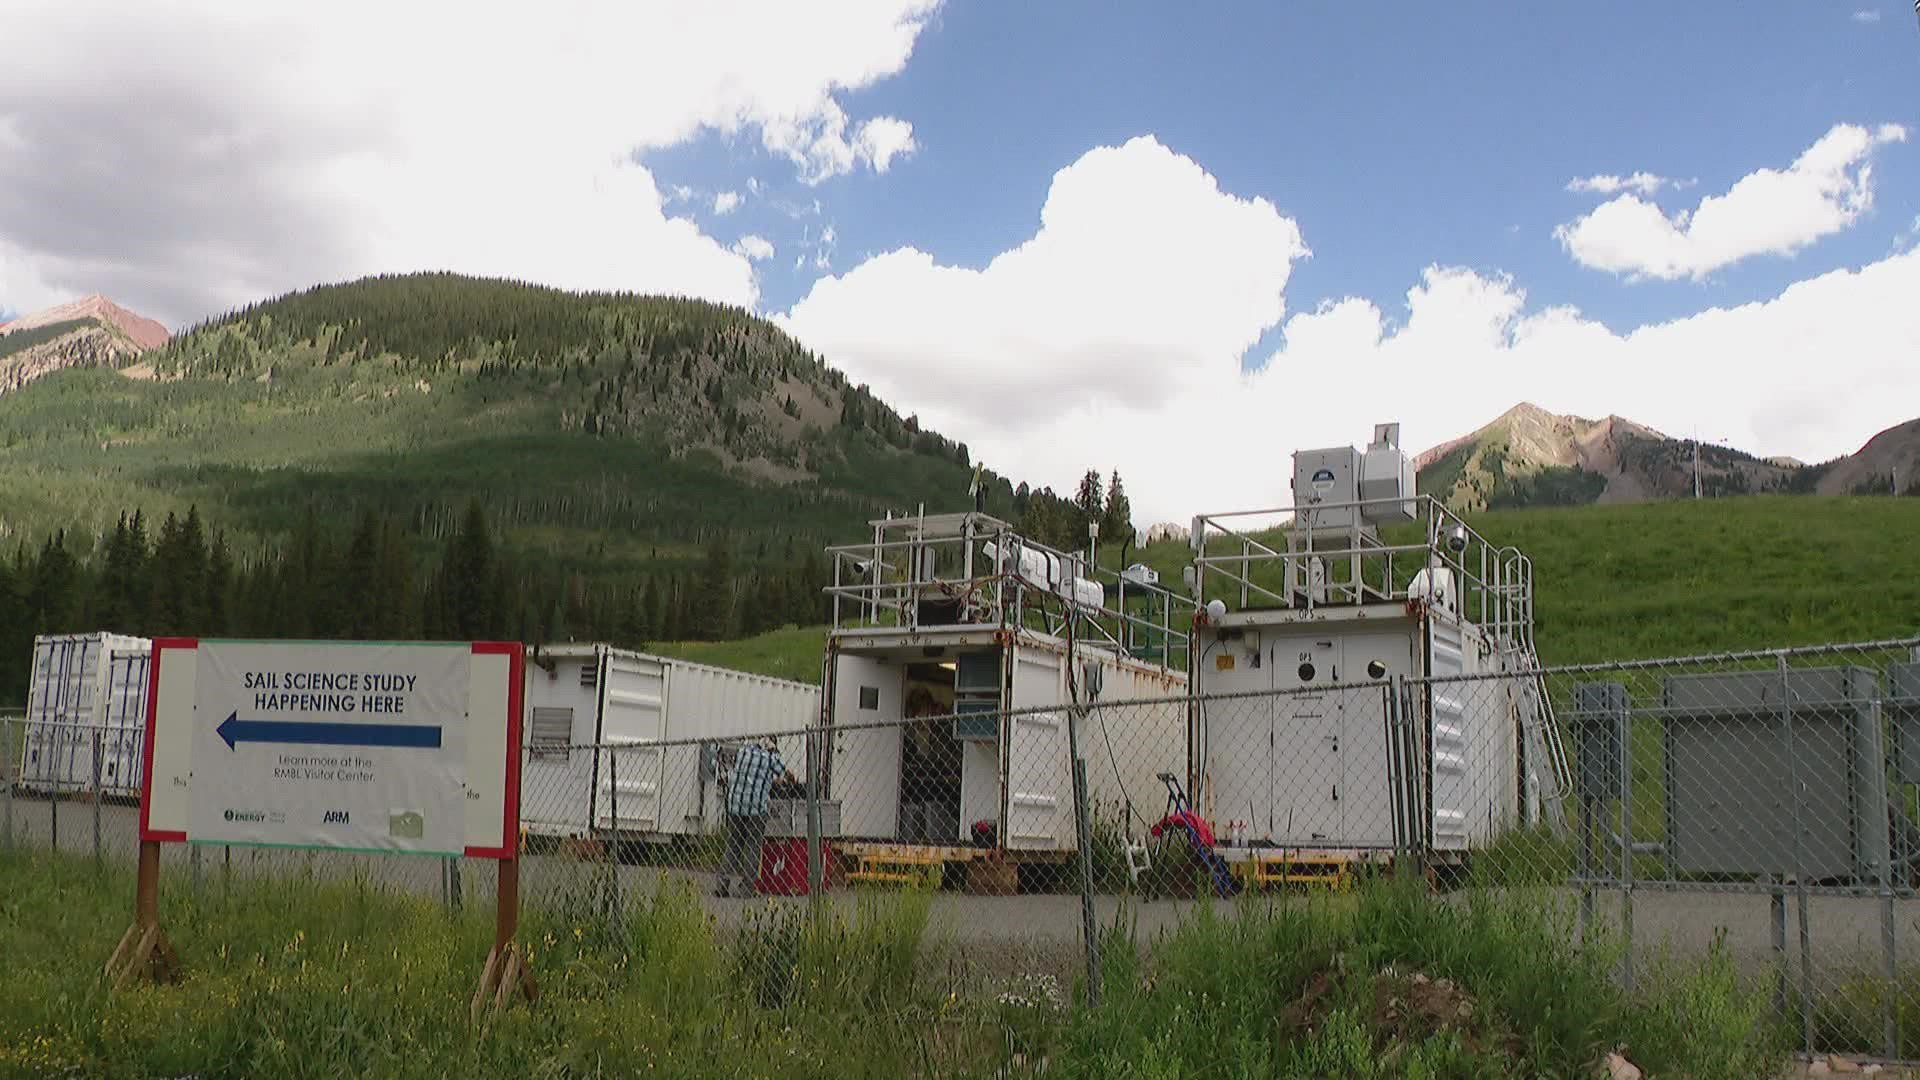 All of the data gathered out near Crested Butte, in the East River Valley, over the next 2 years will help scientists predict water availability in the West.